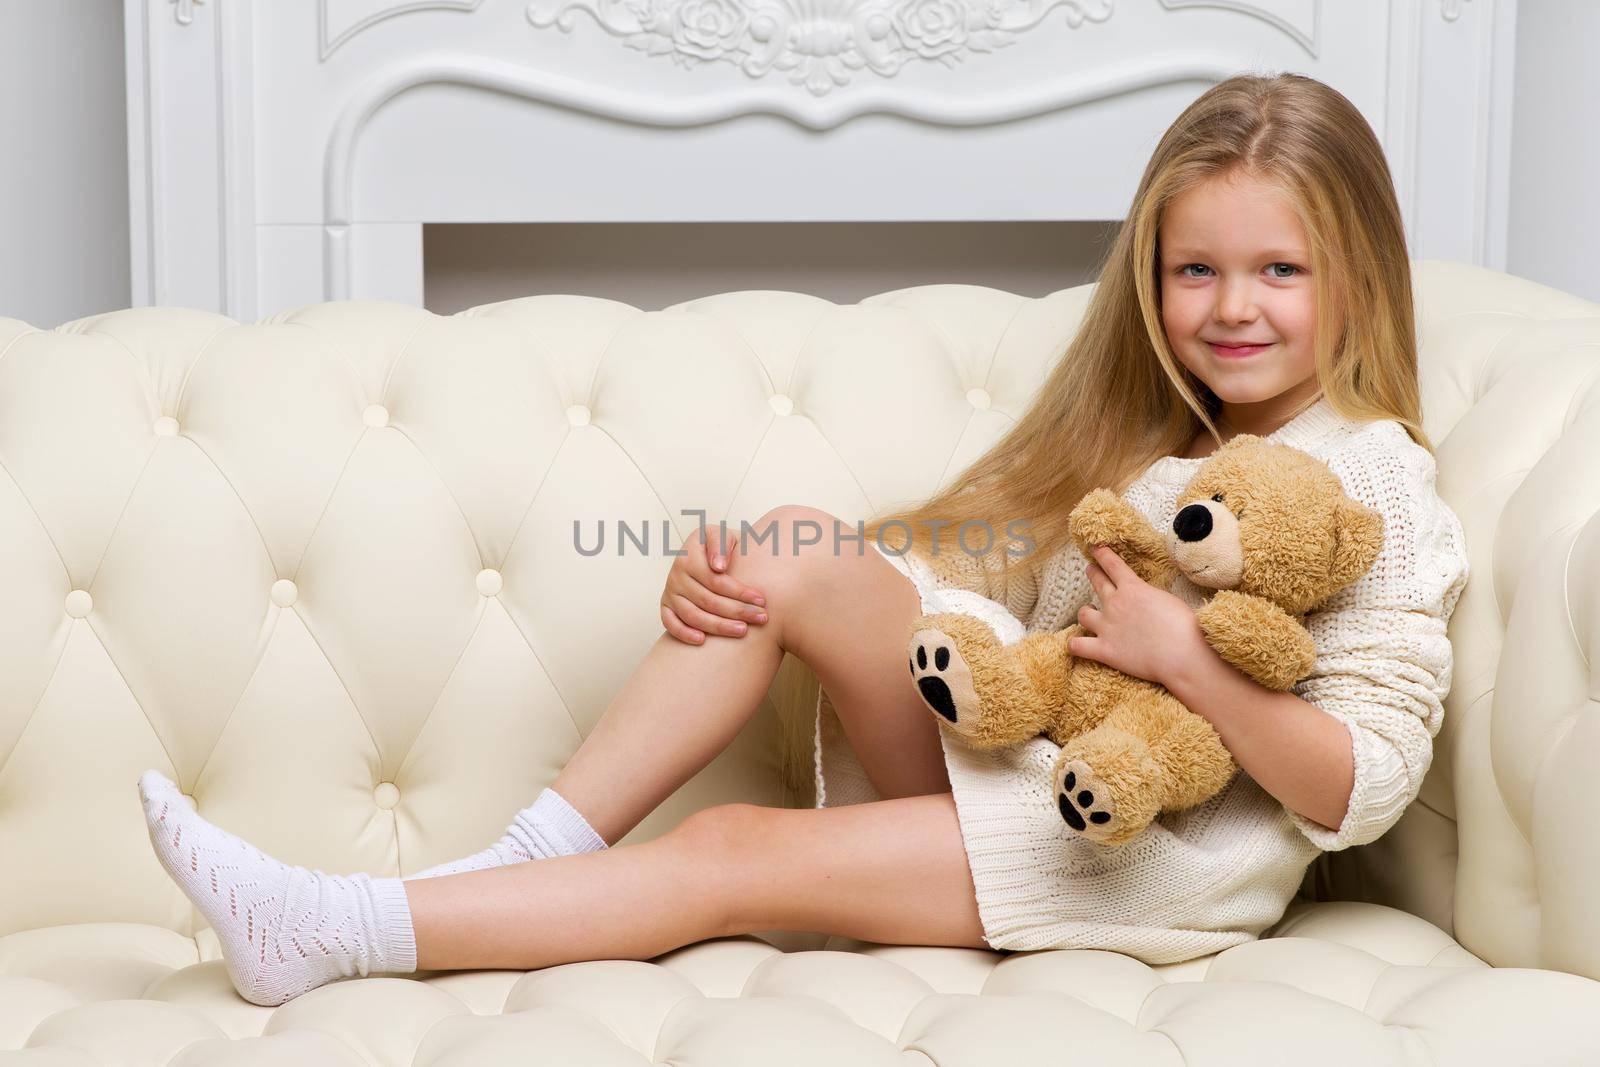 Lovely blonde girl sitting on comfortable sofa hugging teddy bear. Portrait of cute long haired girl wearing warm knitted dress. Adorable happy child resting on couch with favorite stuffed toy